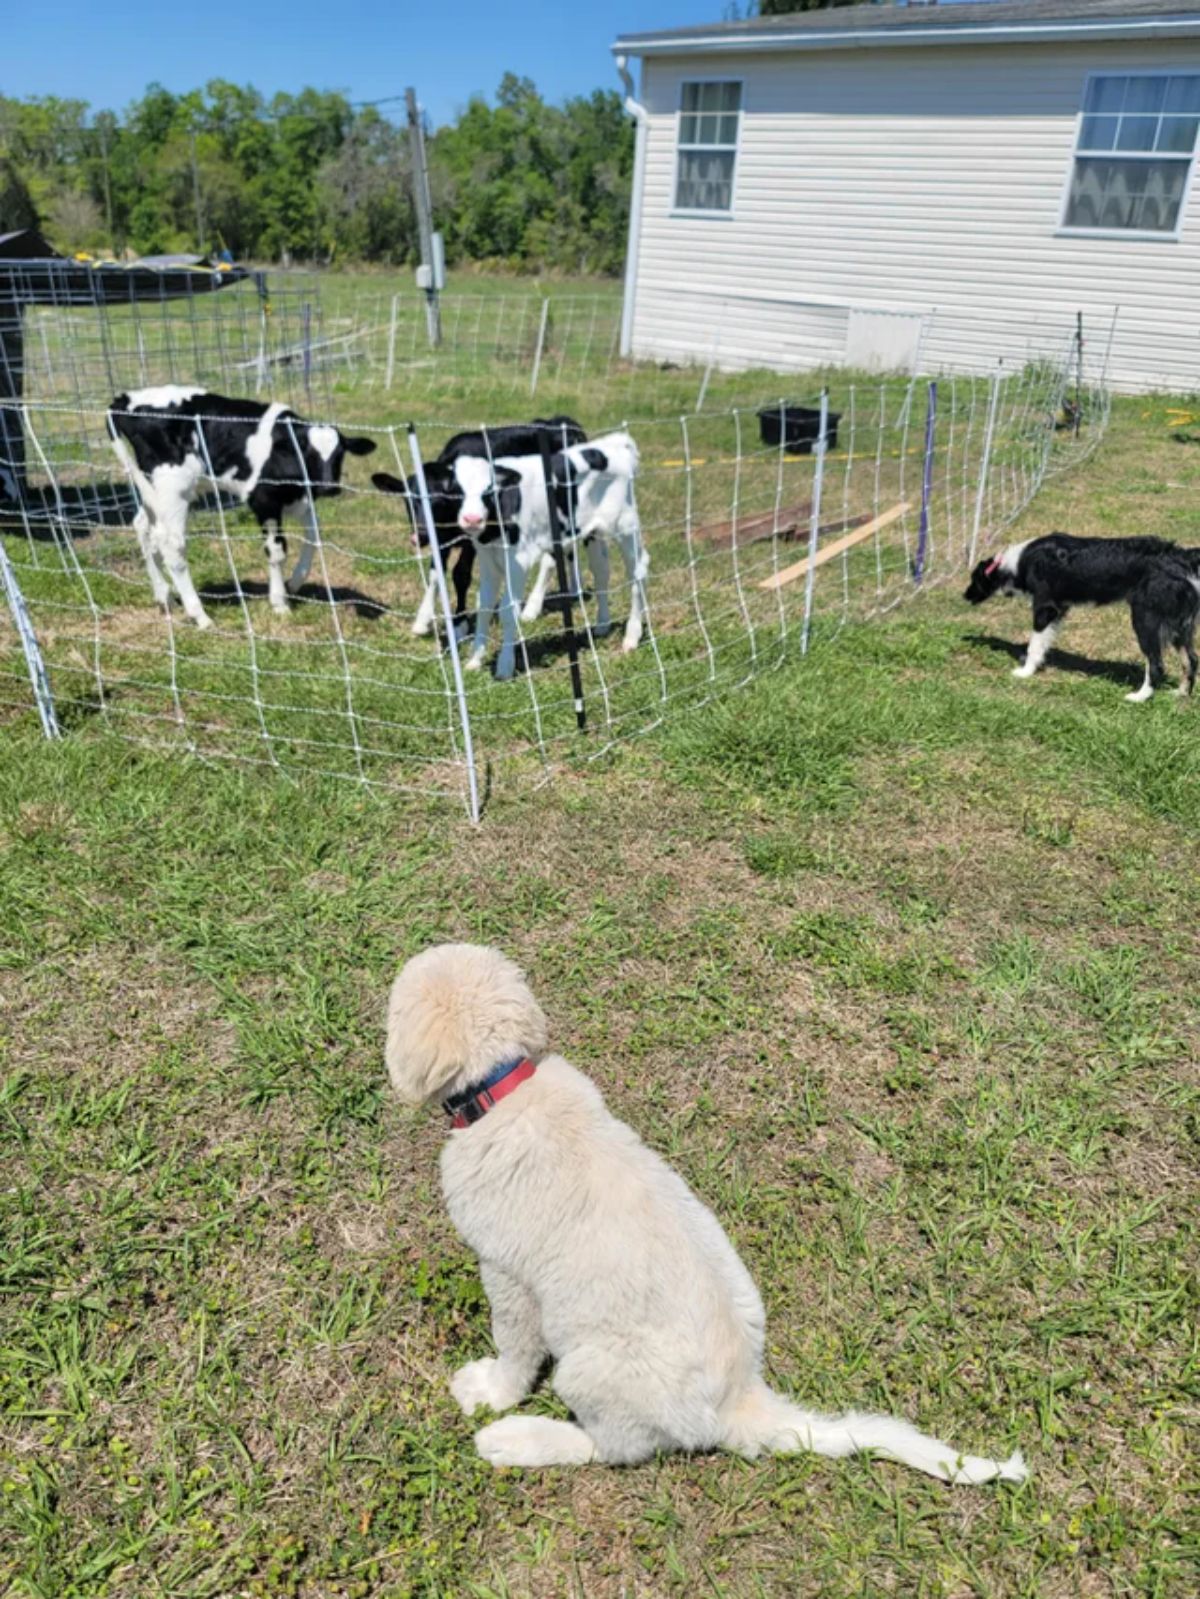 fluffy white dog and black and white dog standing outside a fenced-in area holding black and white calves